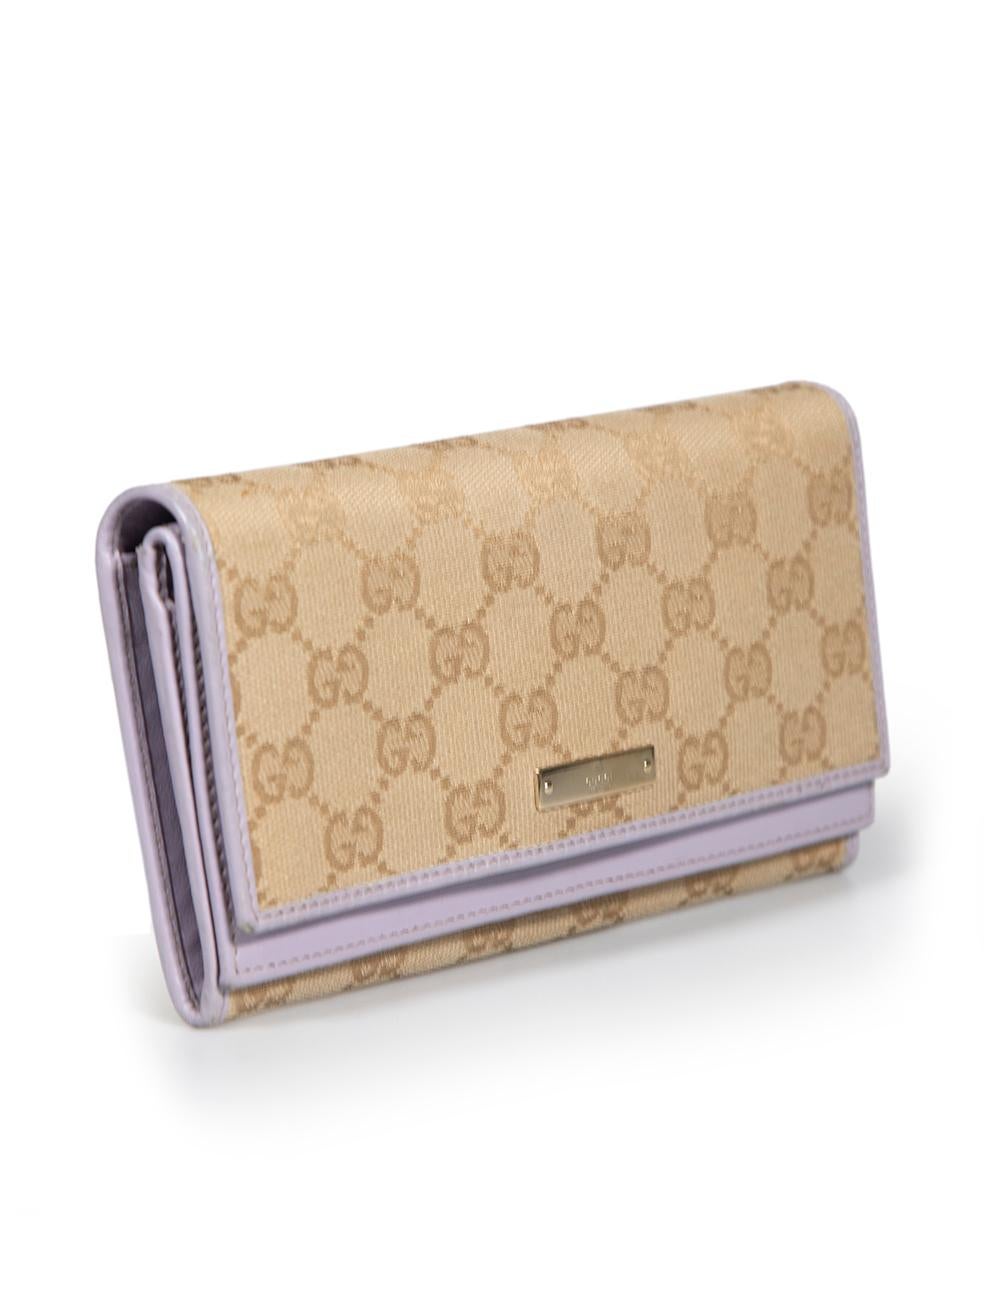 CONDITION is Very good. Minimal wear to wallet is evident. There is minimal wear to leather edge along wallet has some cracking on this used Gucci designer resale item.
 
 
 
 Details
 
 
 Beige
 
 Canvas
 
 Wallet
 
 Purple leather trim
 
 GG Logo